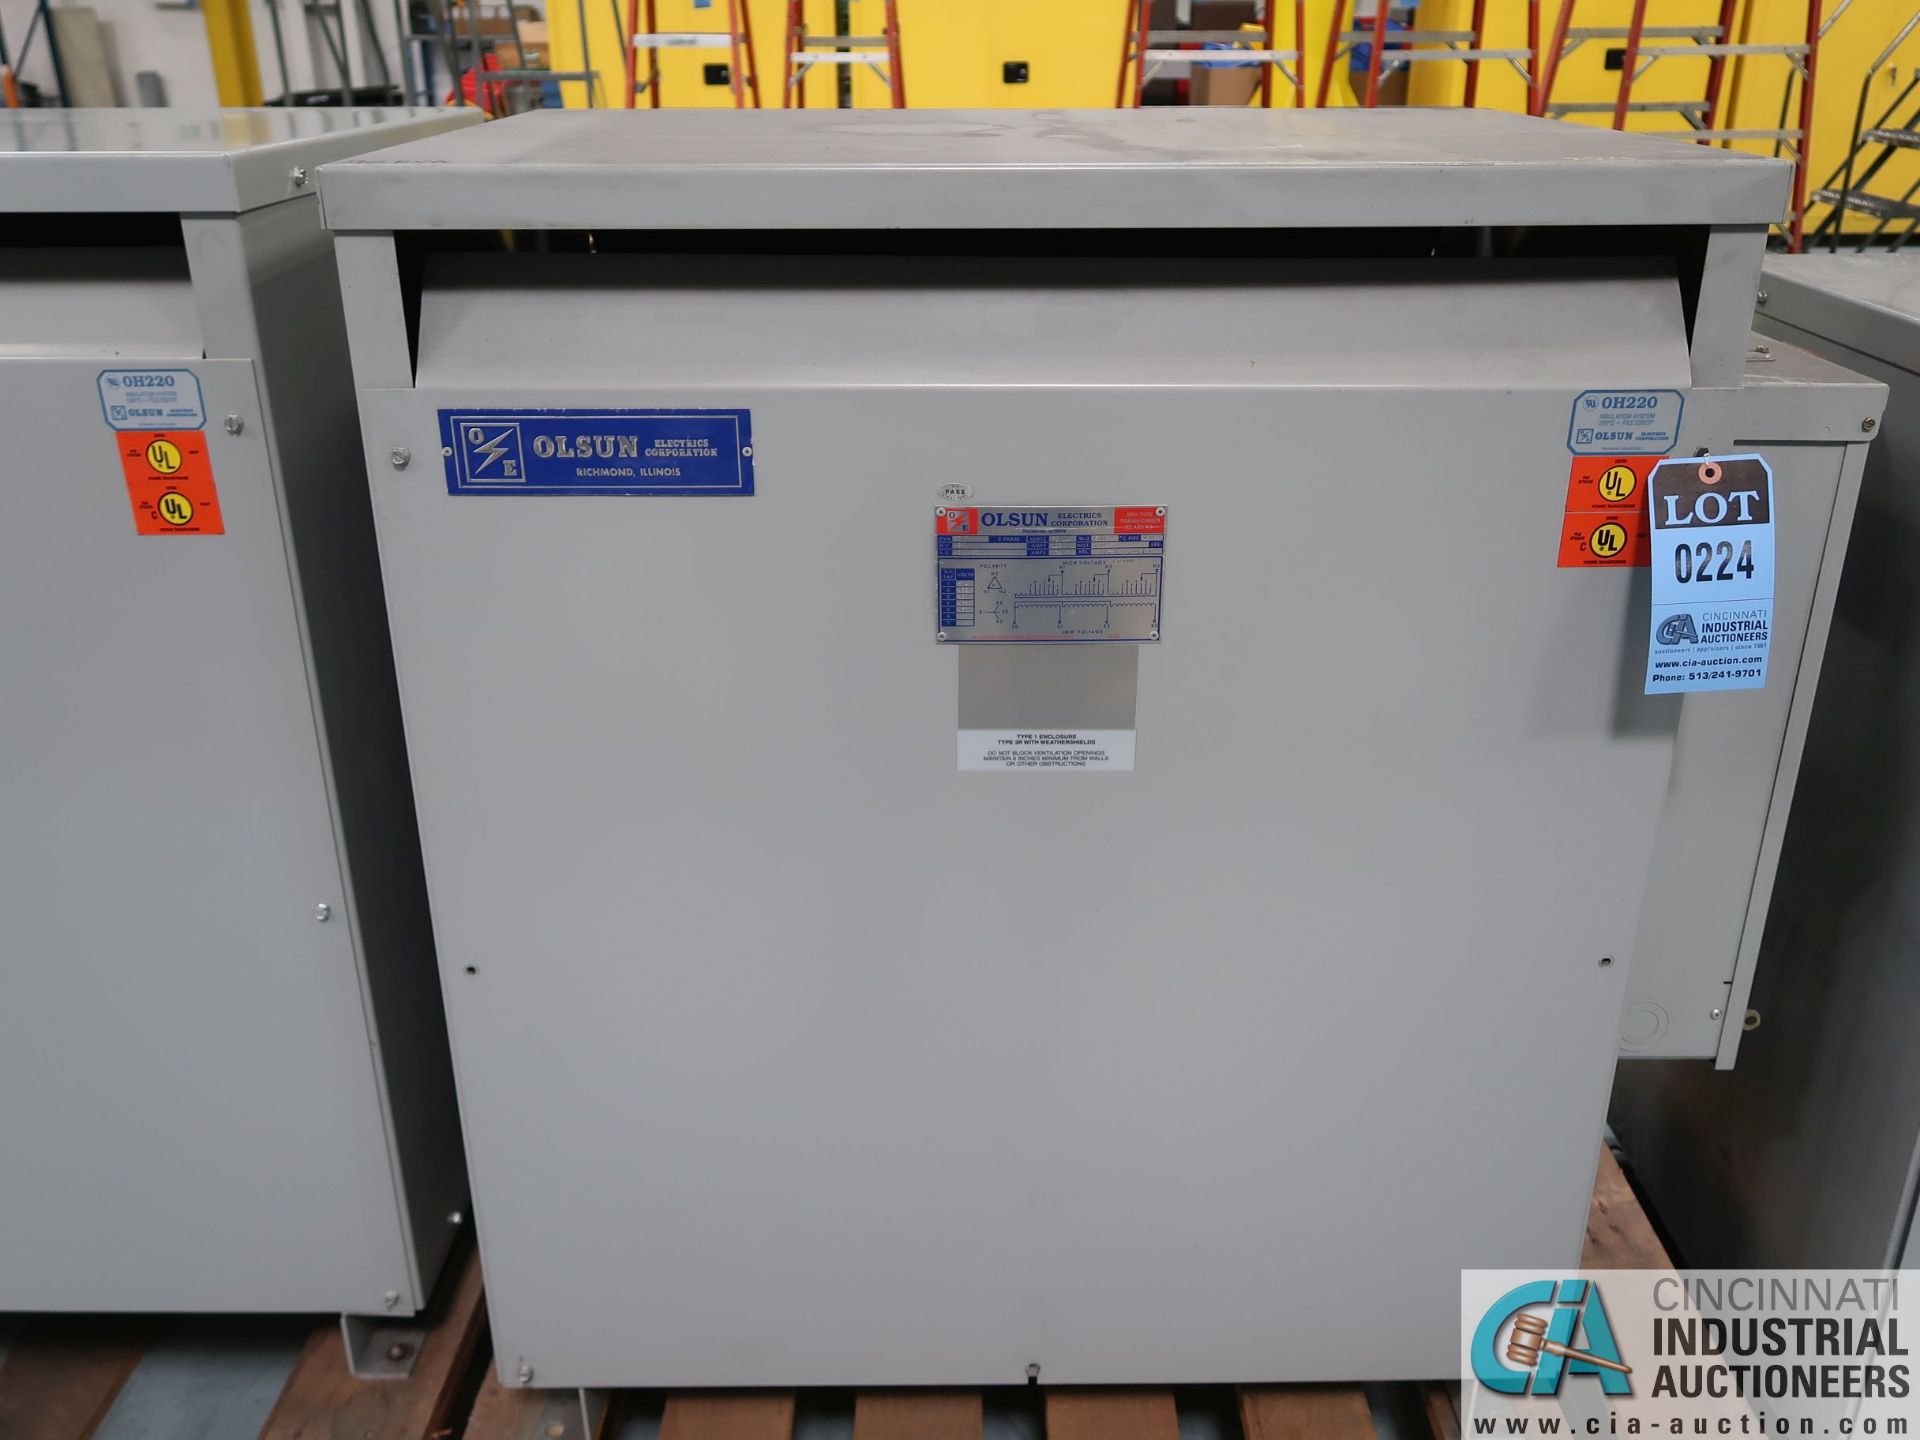 90 KVA OLSUN DRY TYPE TRANSFORMER *$25.00 RIGGING FEE DUE TO INDUSTRIAL SERVICES AND SALES*